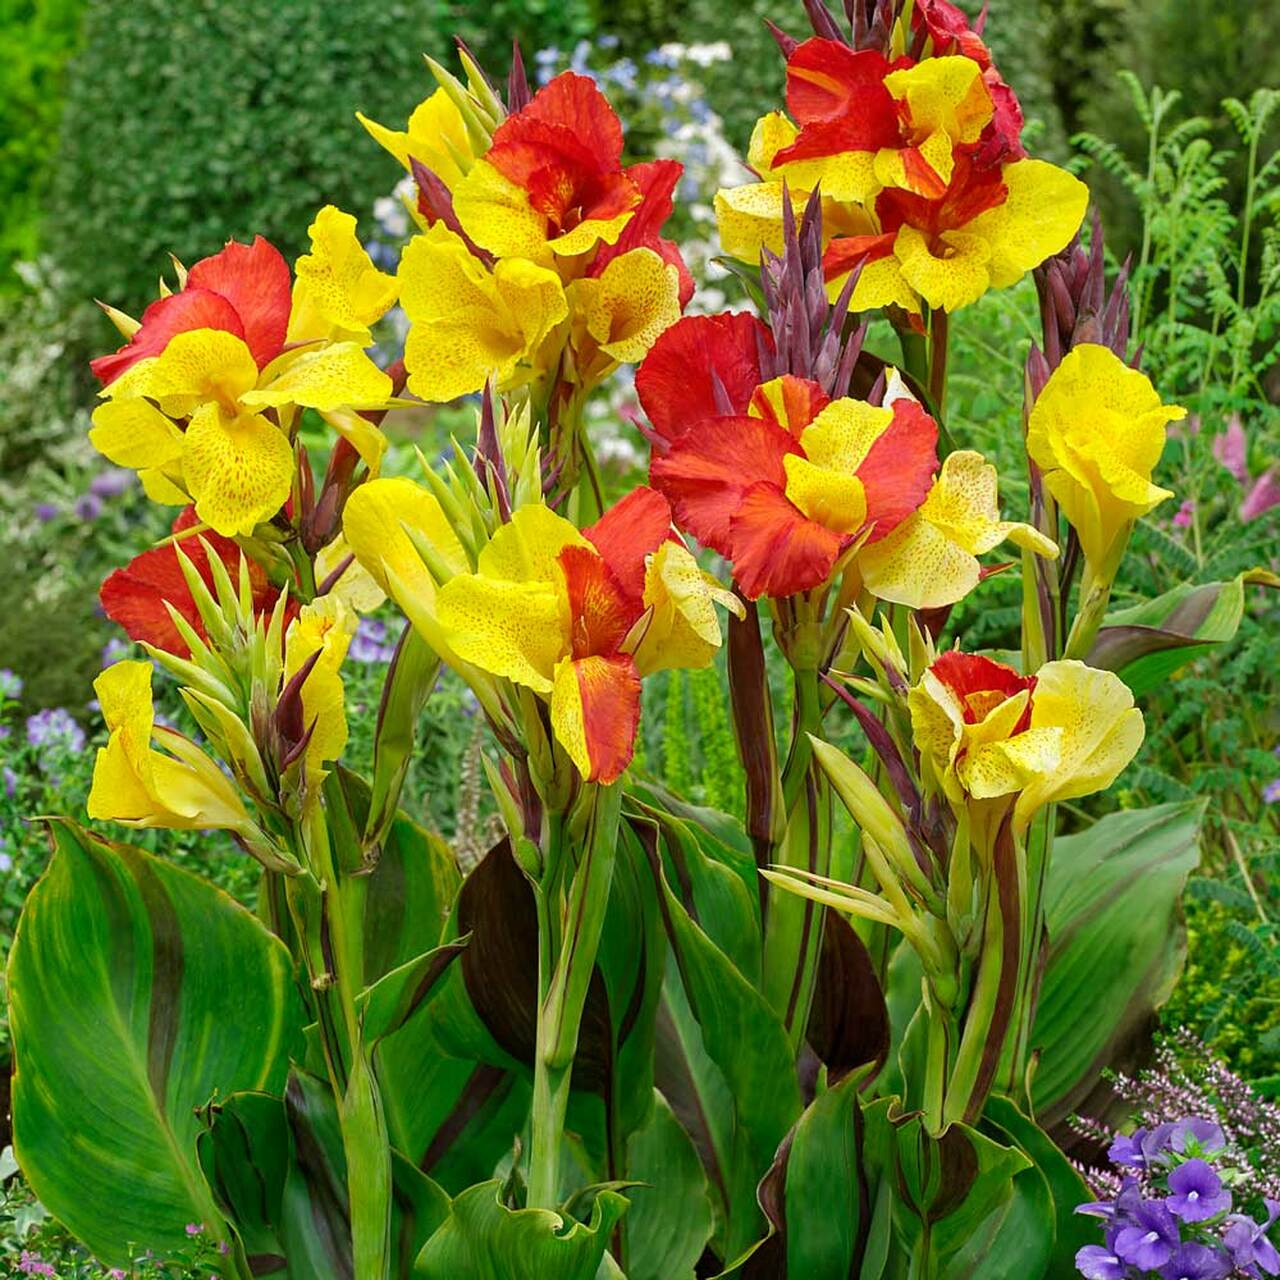 Cleopatra Canna Lily | Large Flowering Canna Lily